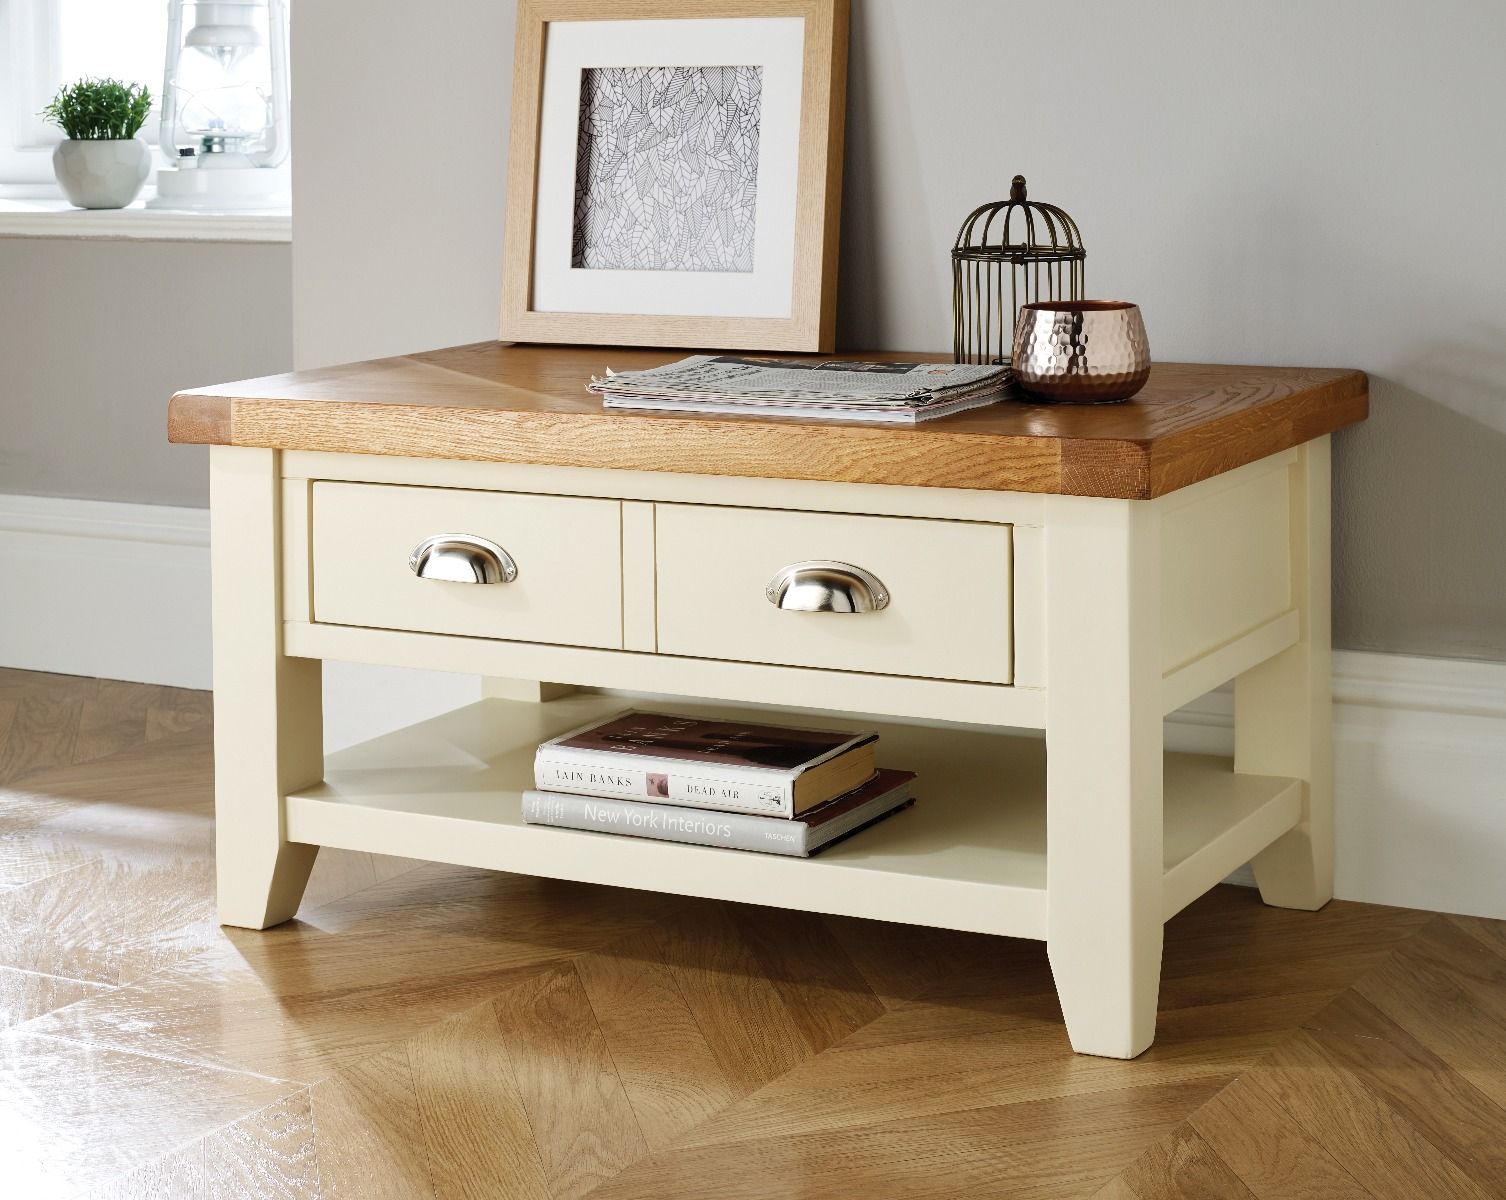 Country Cottage Cream Painted Oak Coffee Table With Drawers - WINTER SALE